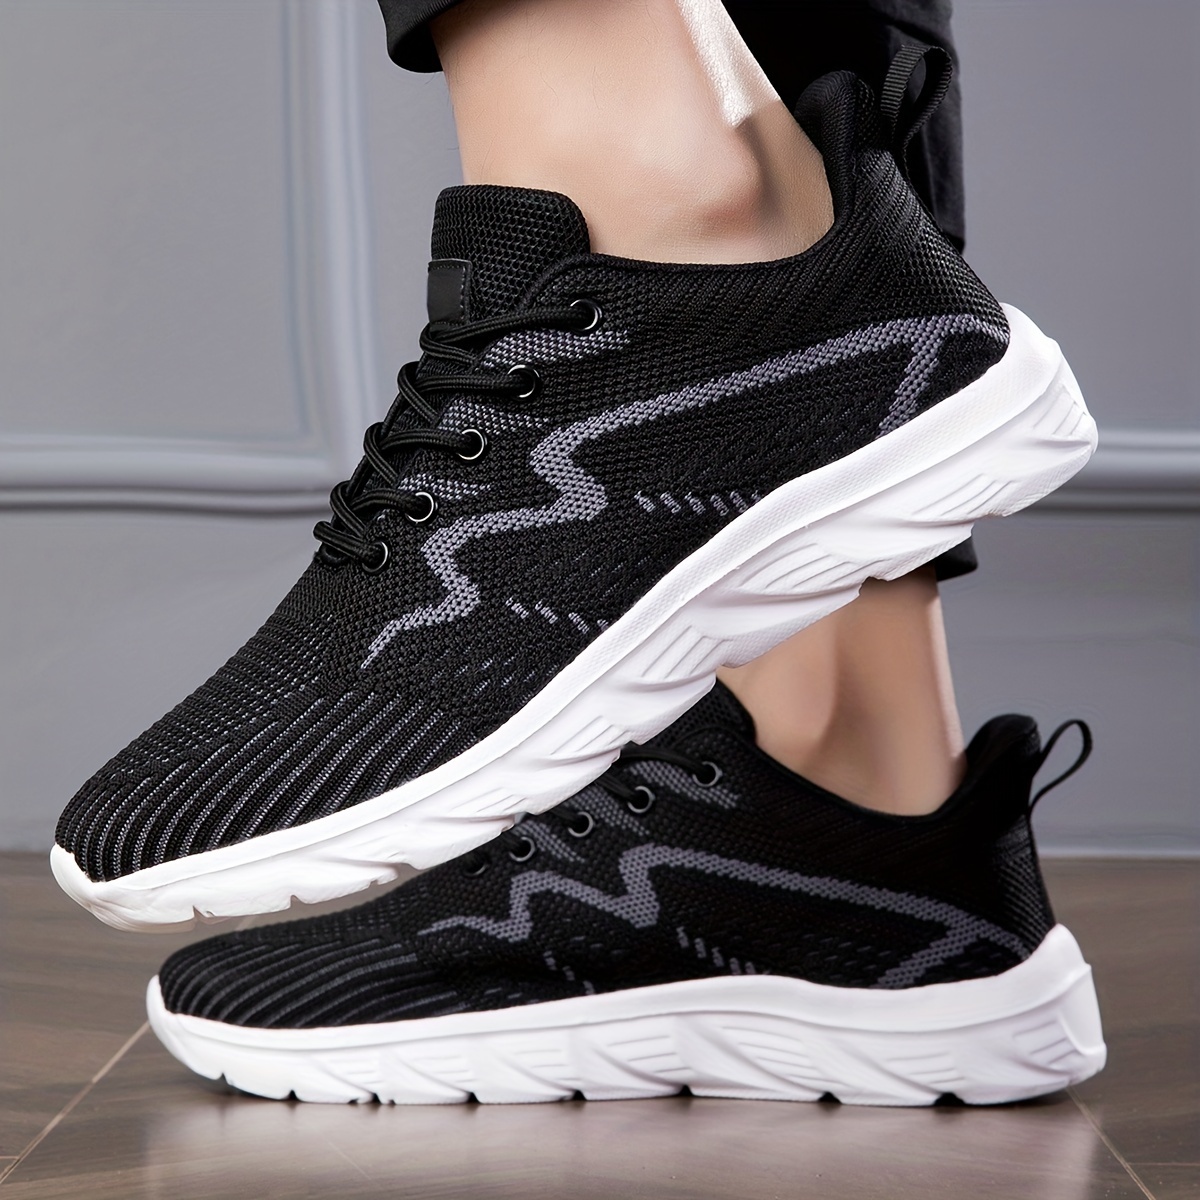 Women Two Tone Lace-up Front Sneakers Fashion Black And White